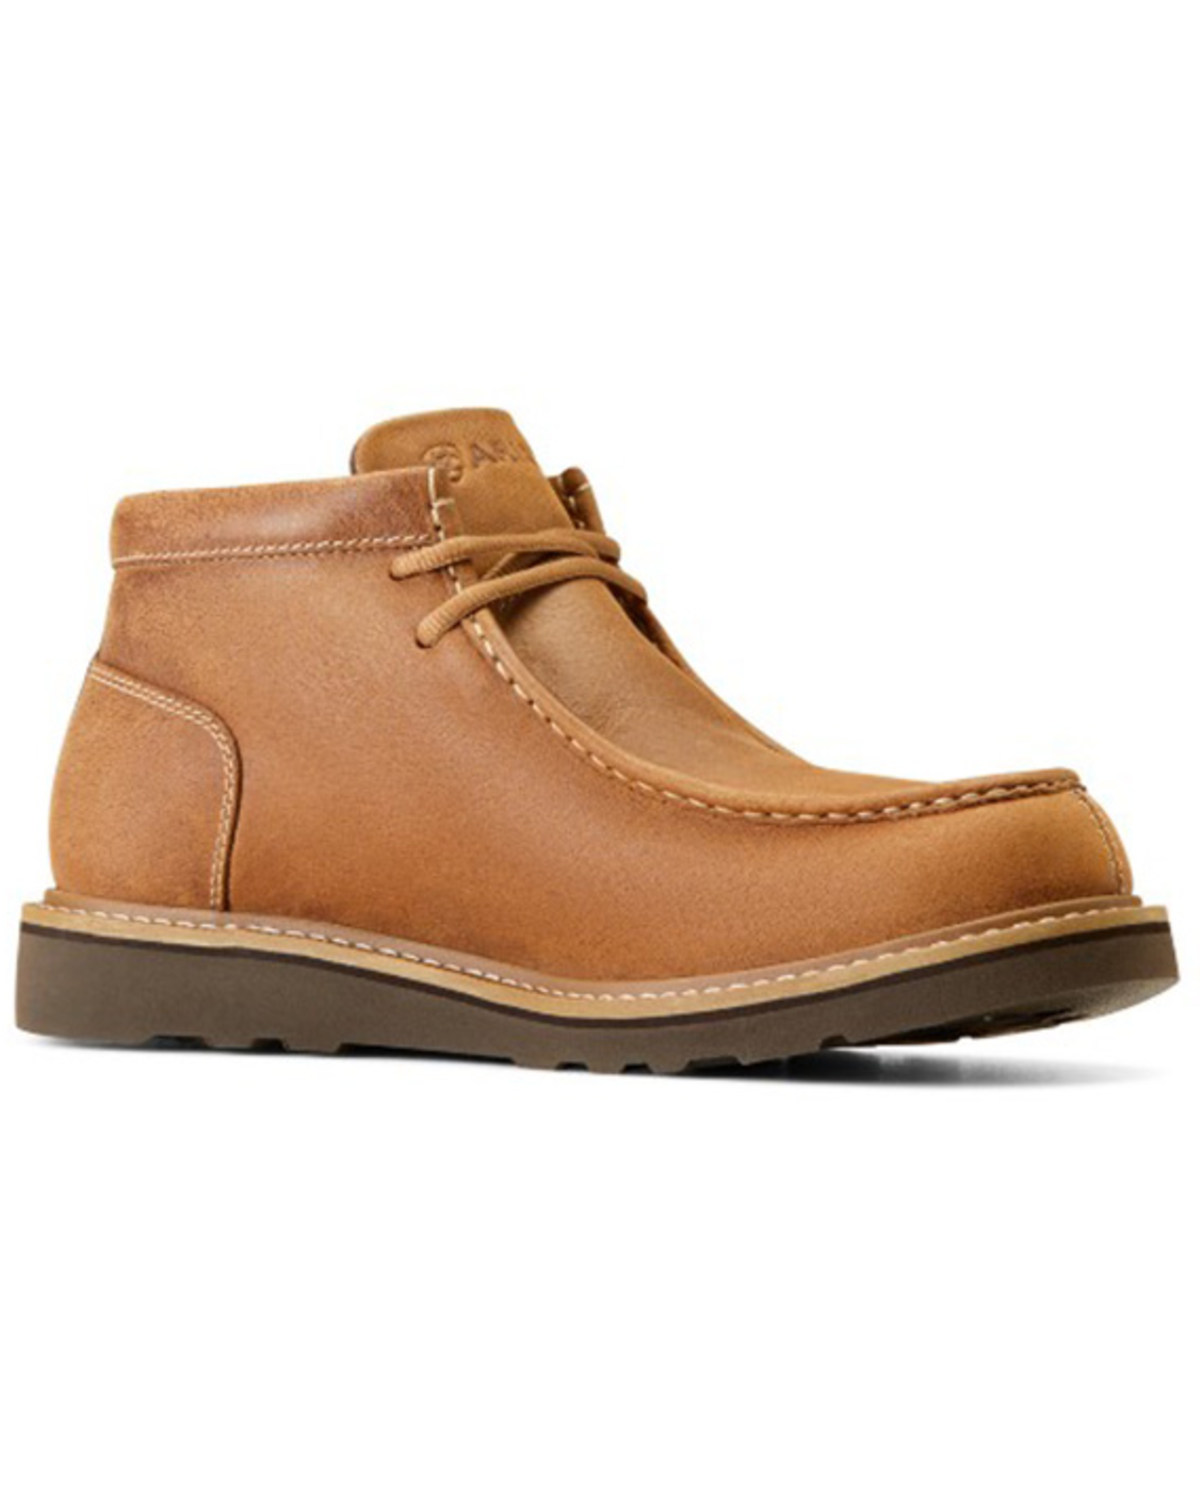 Ariat Men's Recon Country Casual Boots - Moc Toe